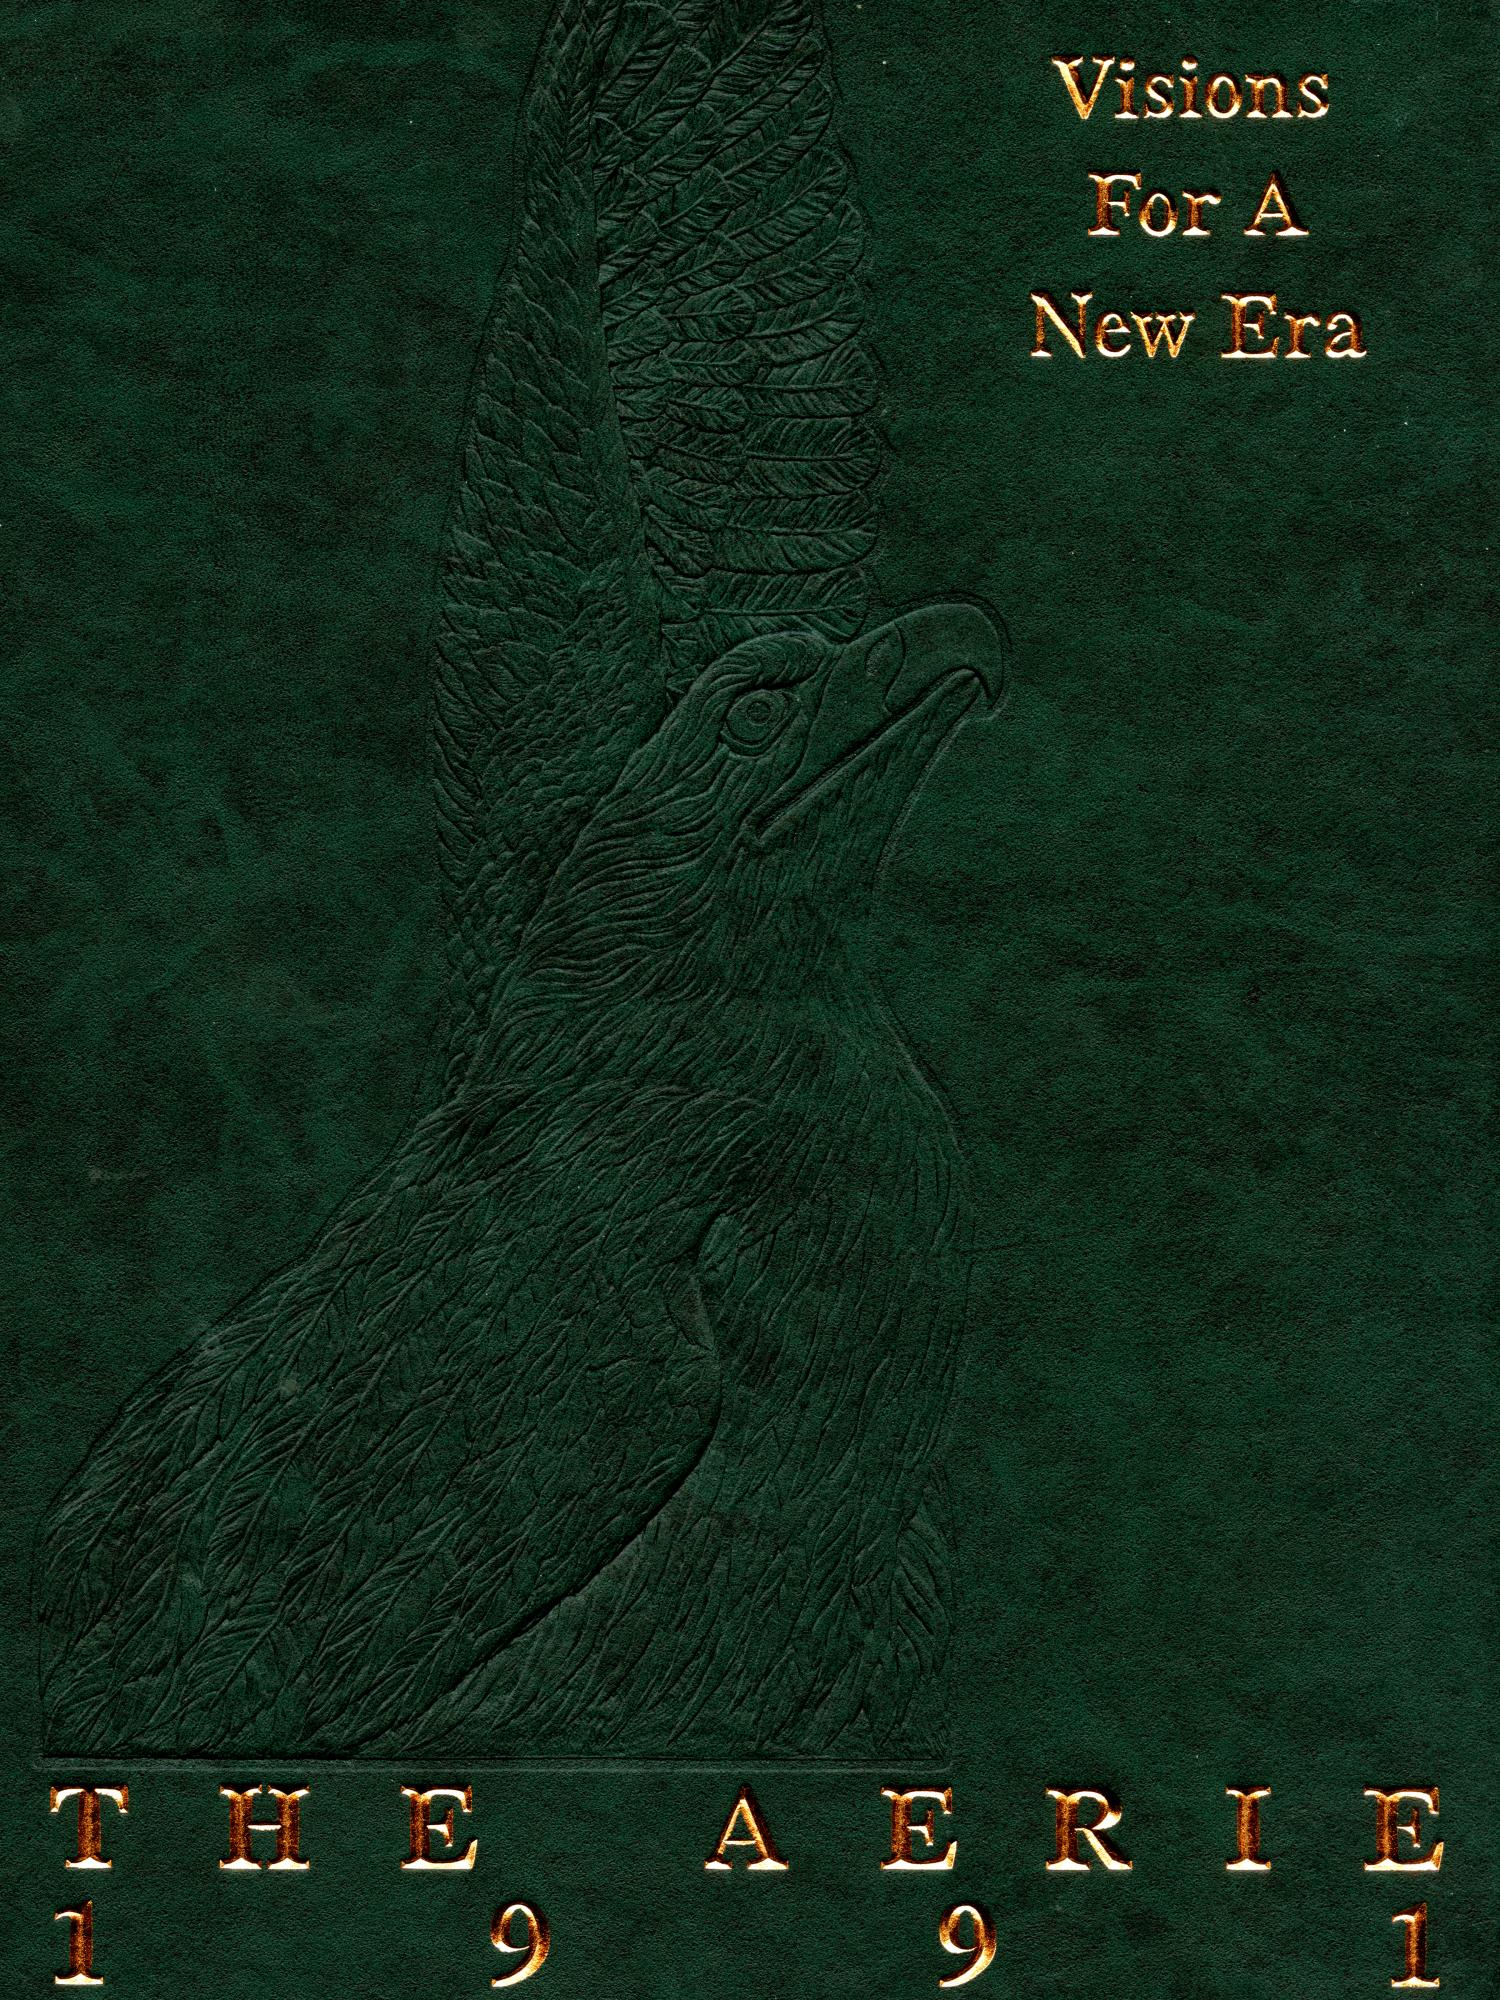 The Aerie, Yearbook of the University of North Texas, 1991
                                                
                                                    Front Cover
                                                